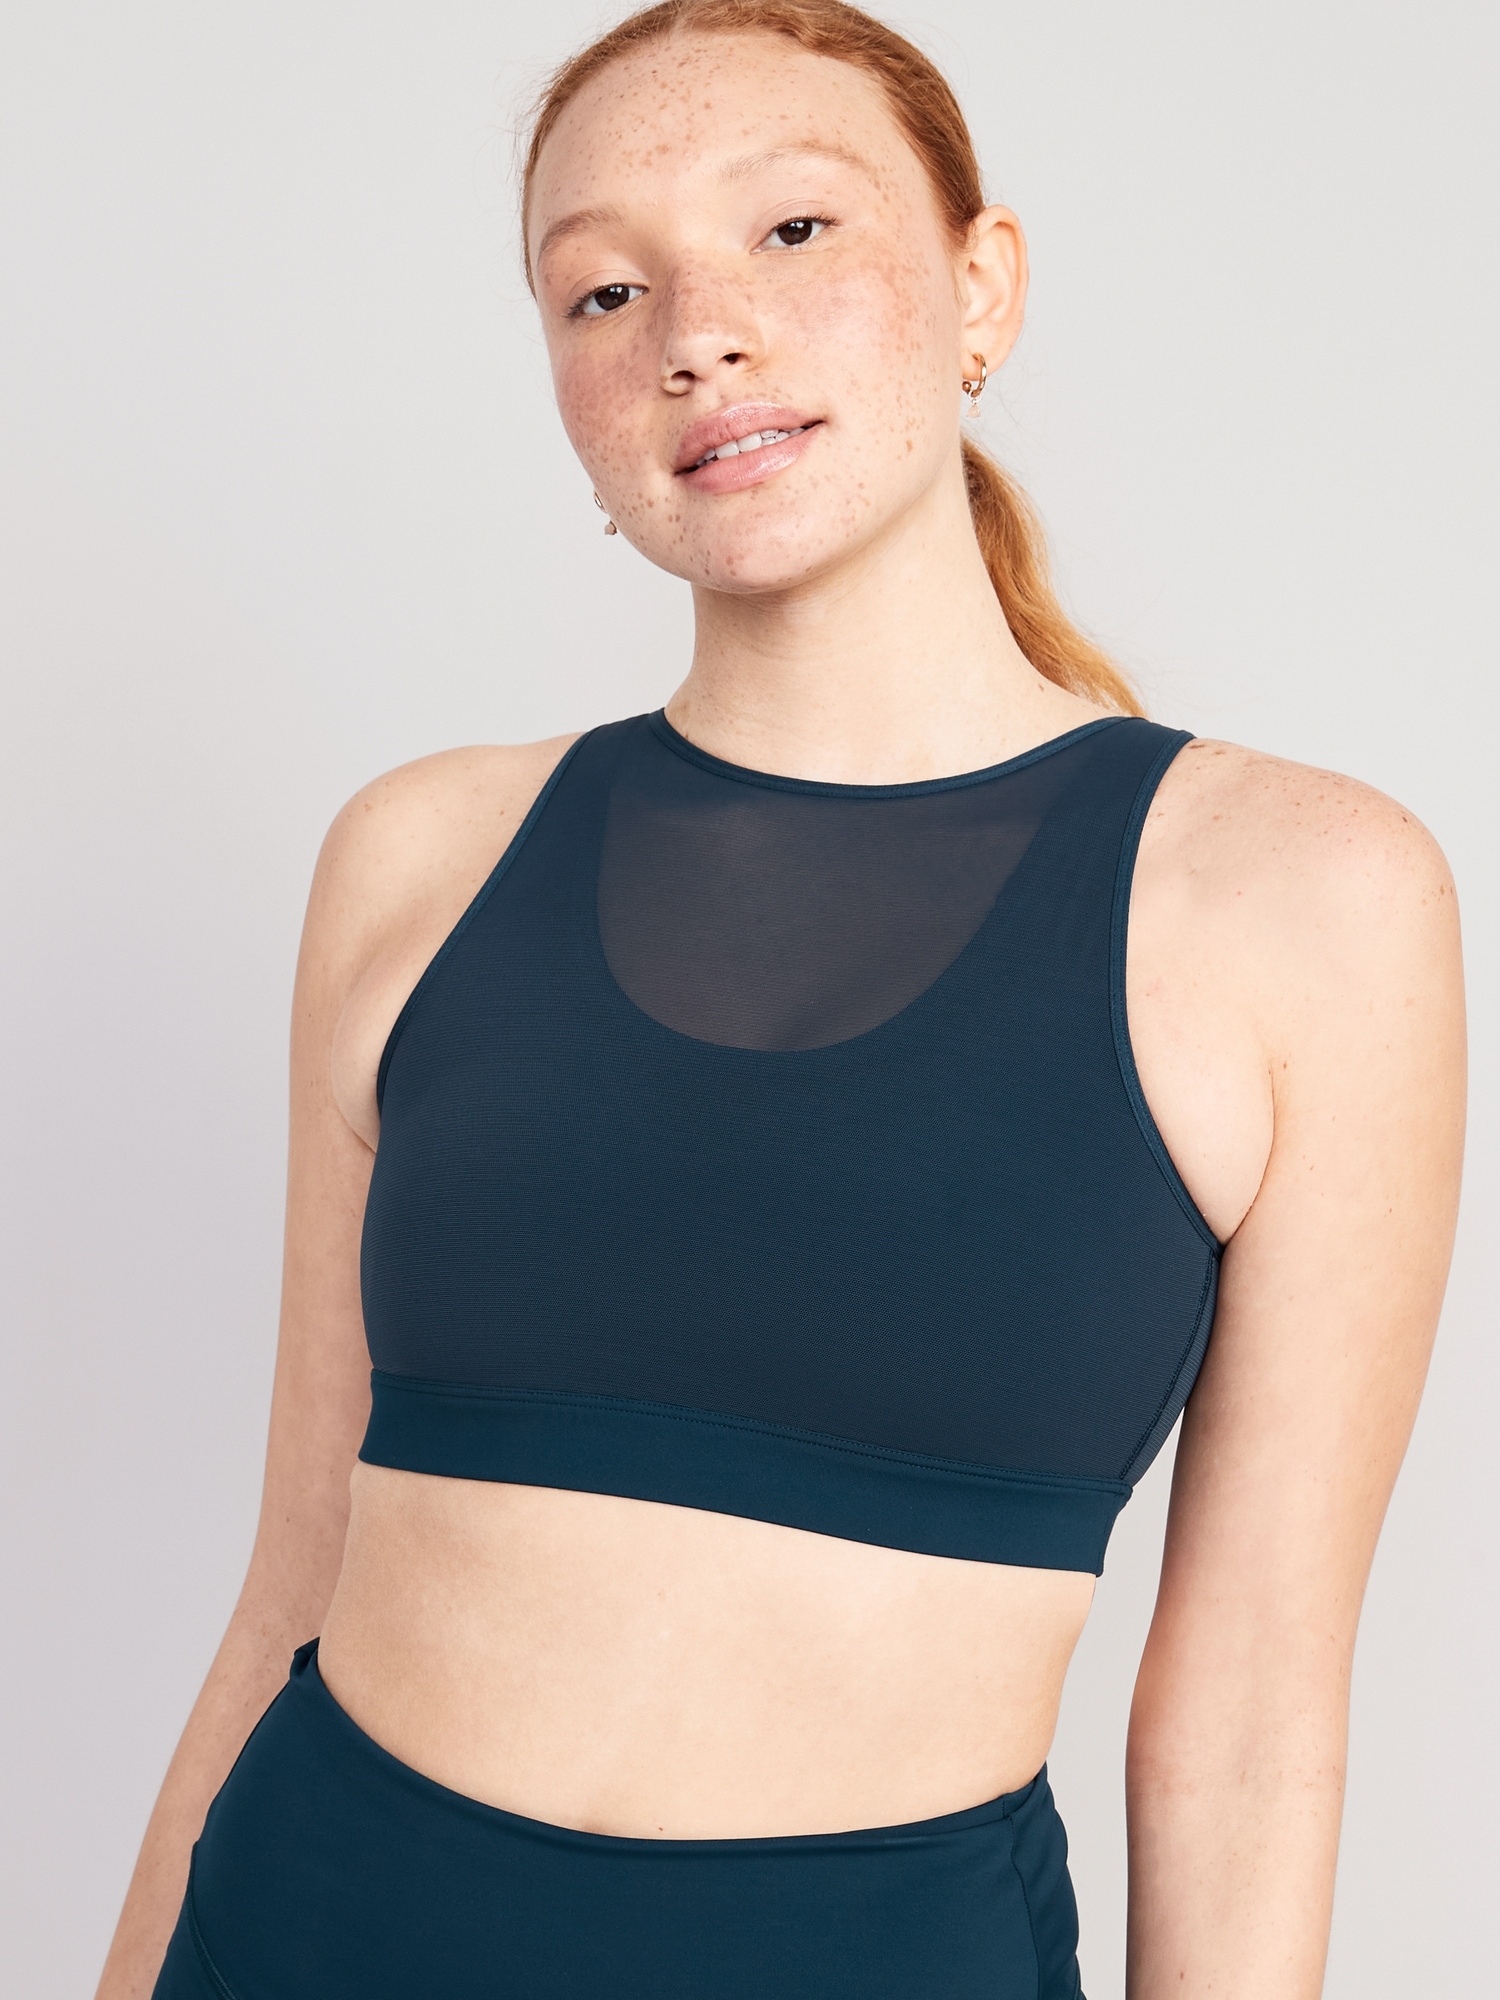 Old Navy Active Youth XL Sports Bra